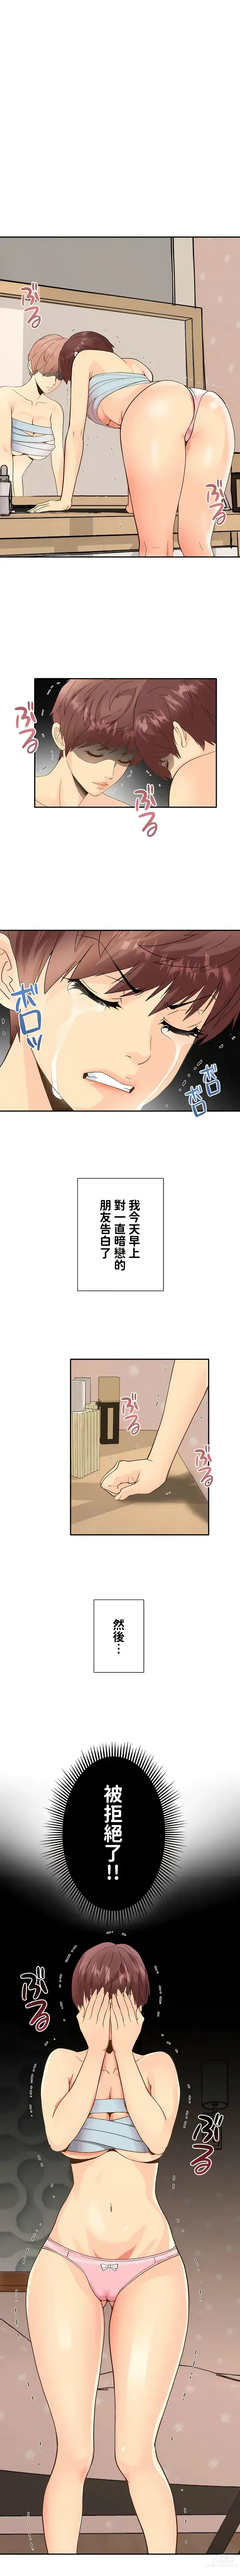 Page 2 of manga COS女孩 1-35 END